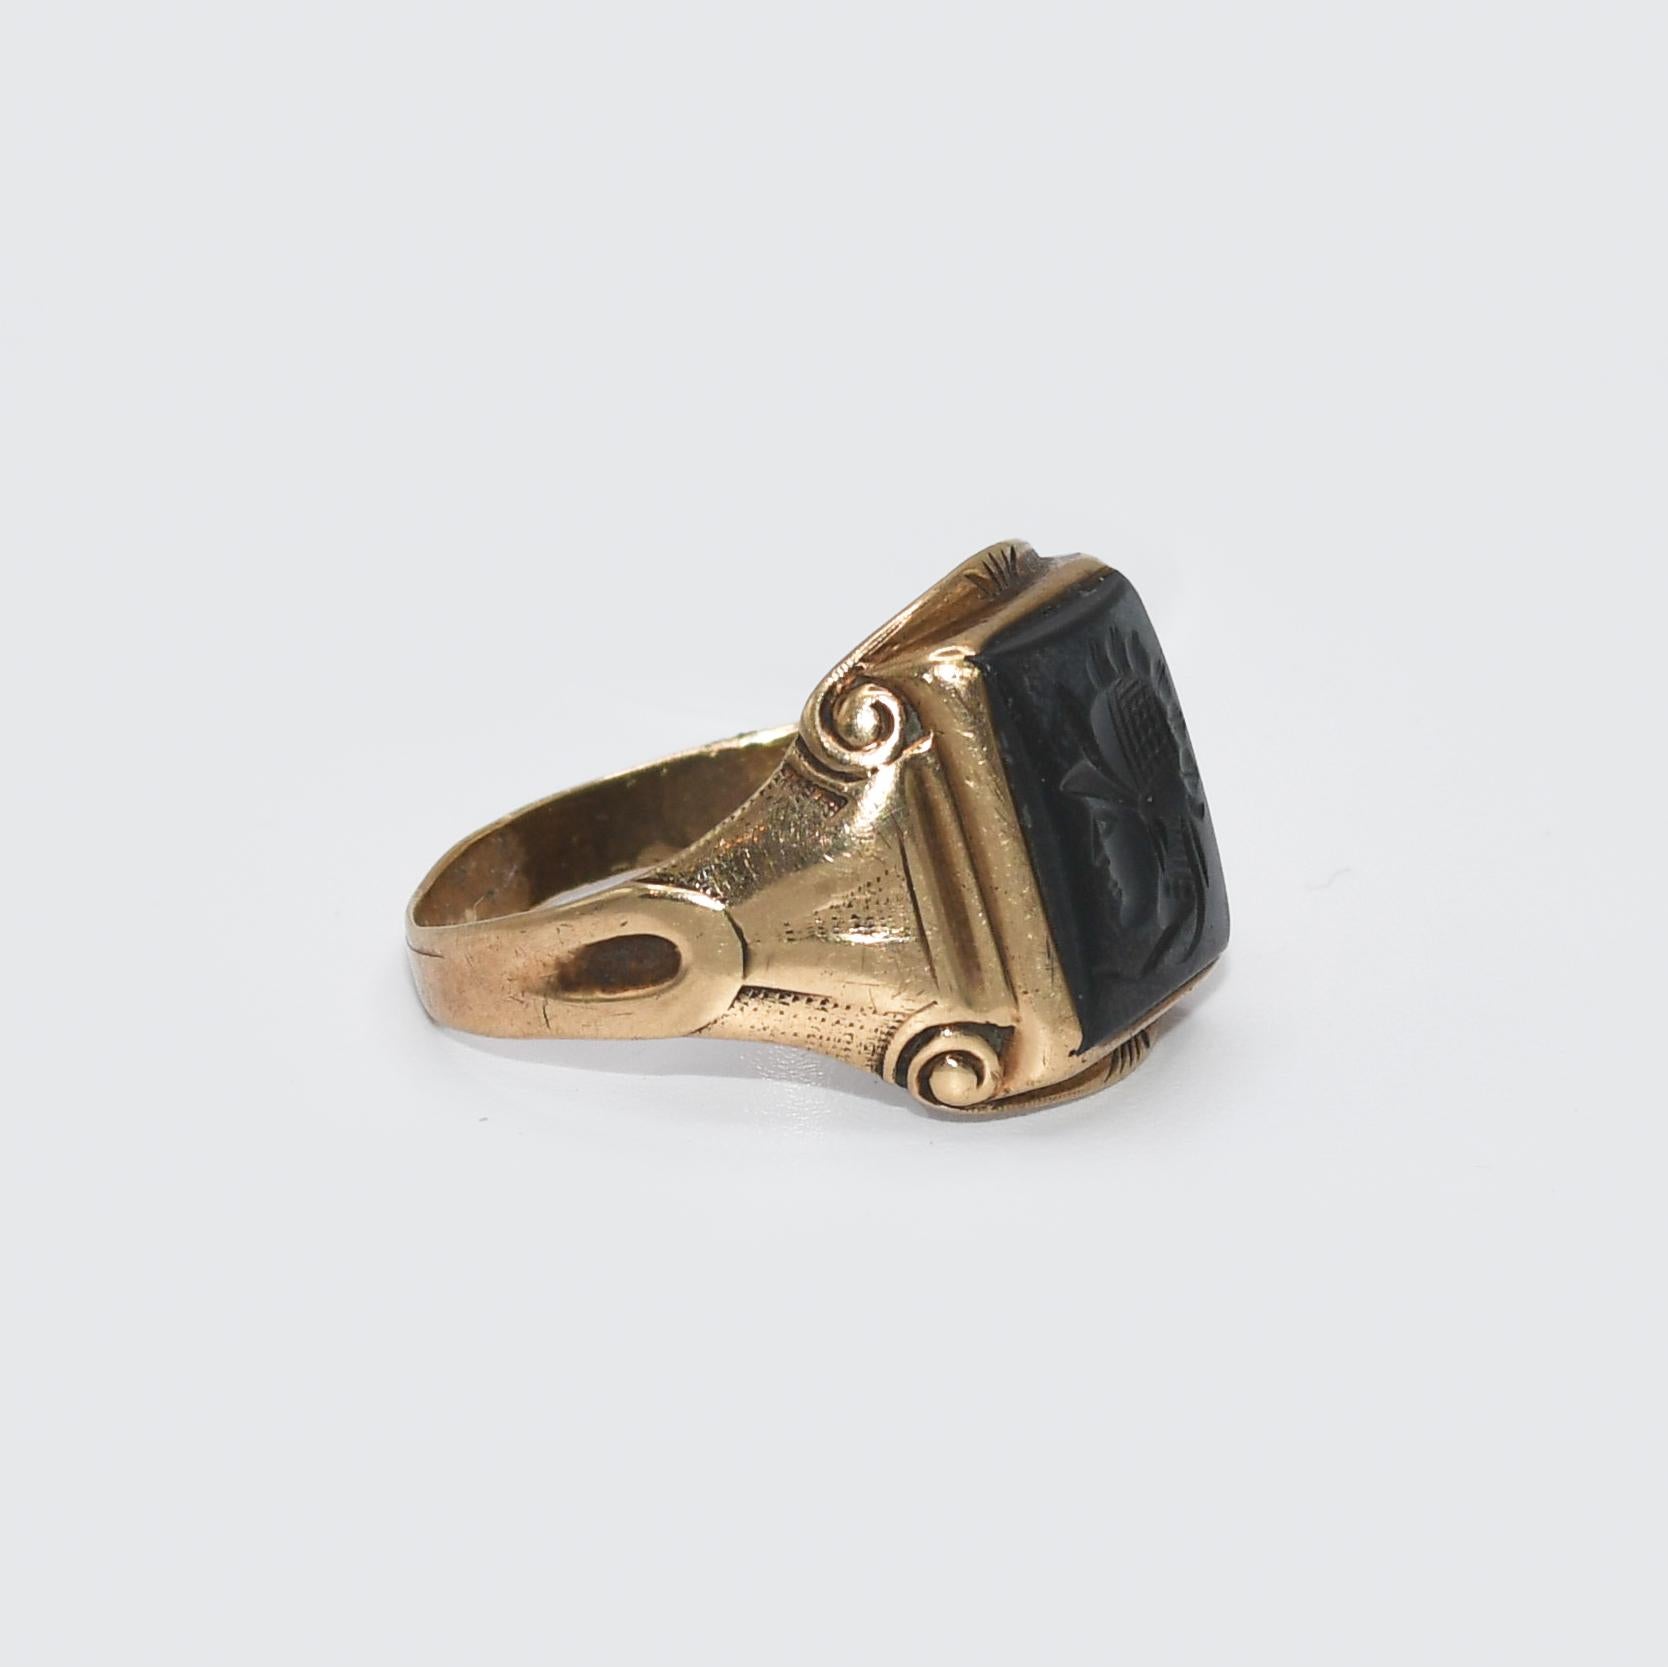 Antique 9k Yellow Gold Hematite signet ring.
Tests 9k with a electronic tester.
Ring Size  is 11.75 and can be sized to a maximum of 10 for an extra fee.
Good condition!
The shank is a bit wavy but fits great
11x13mm